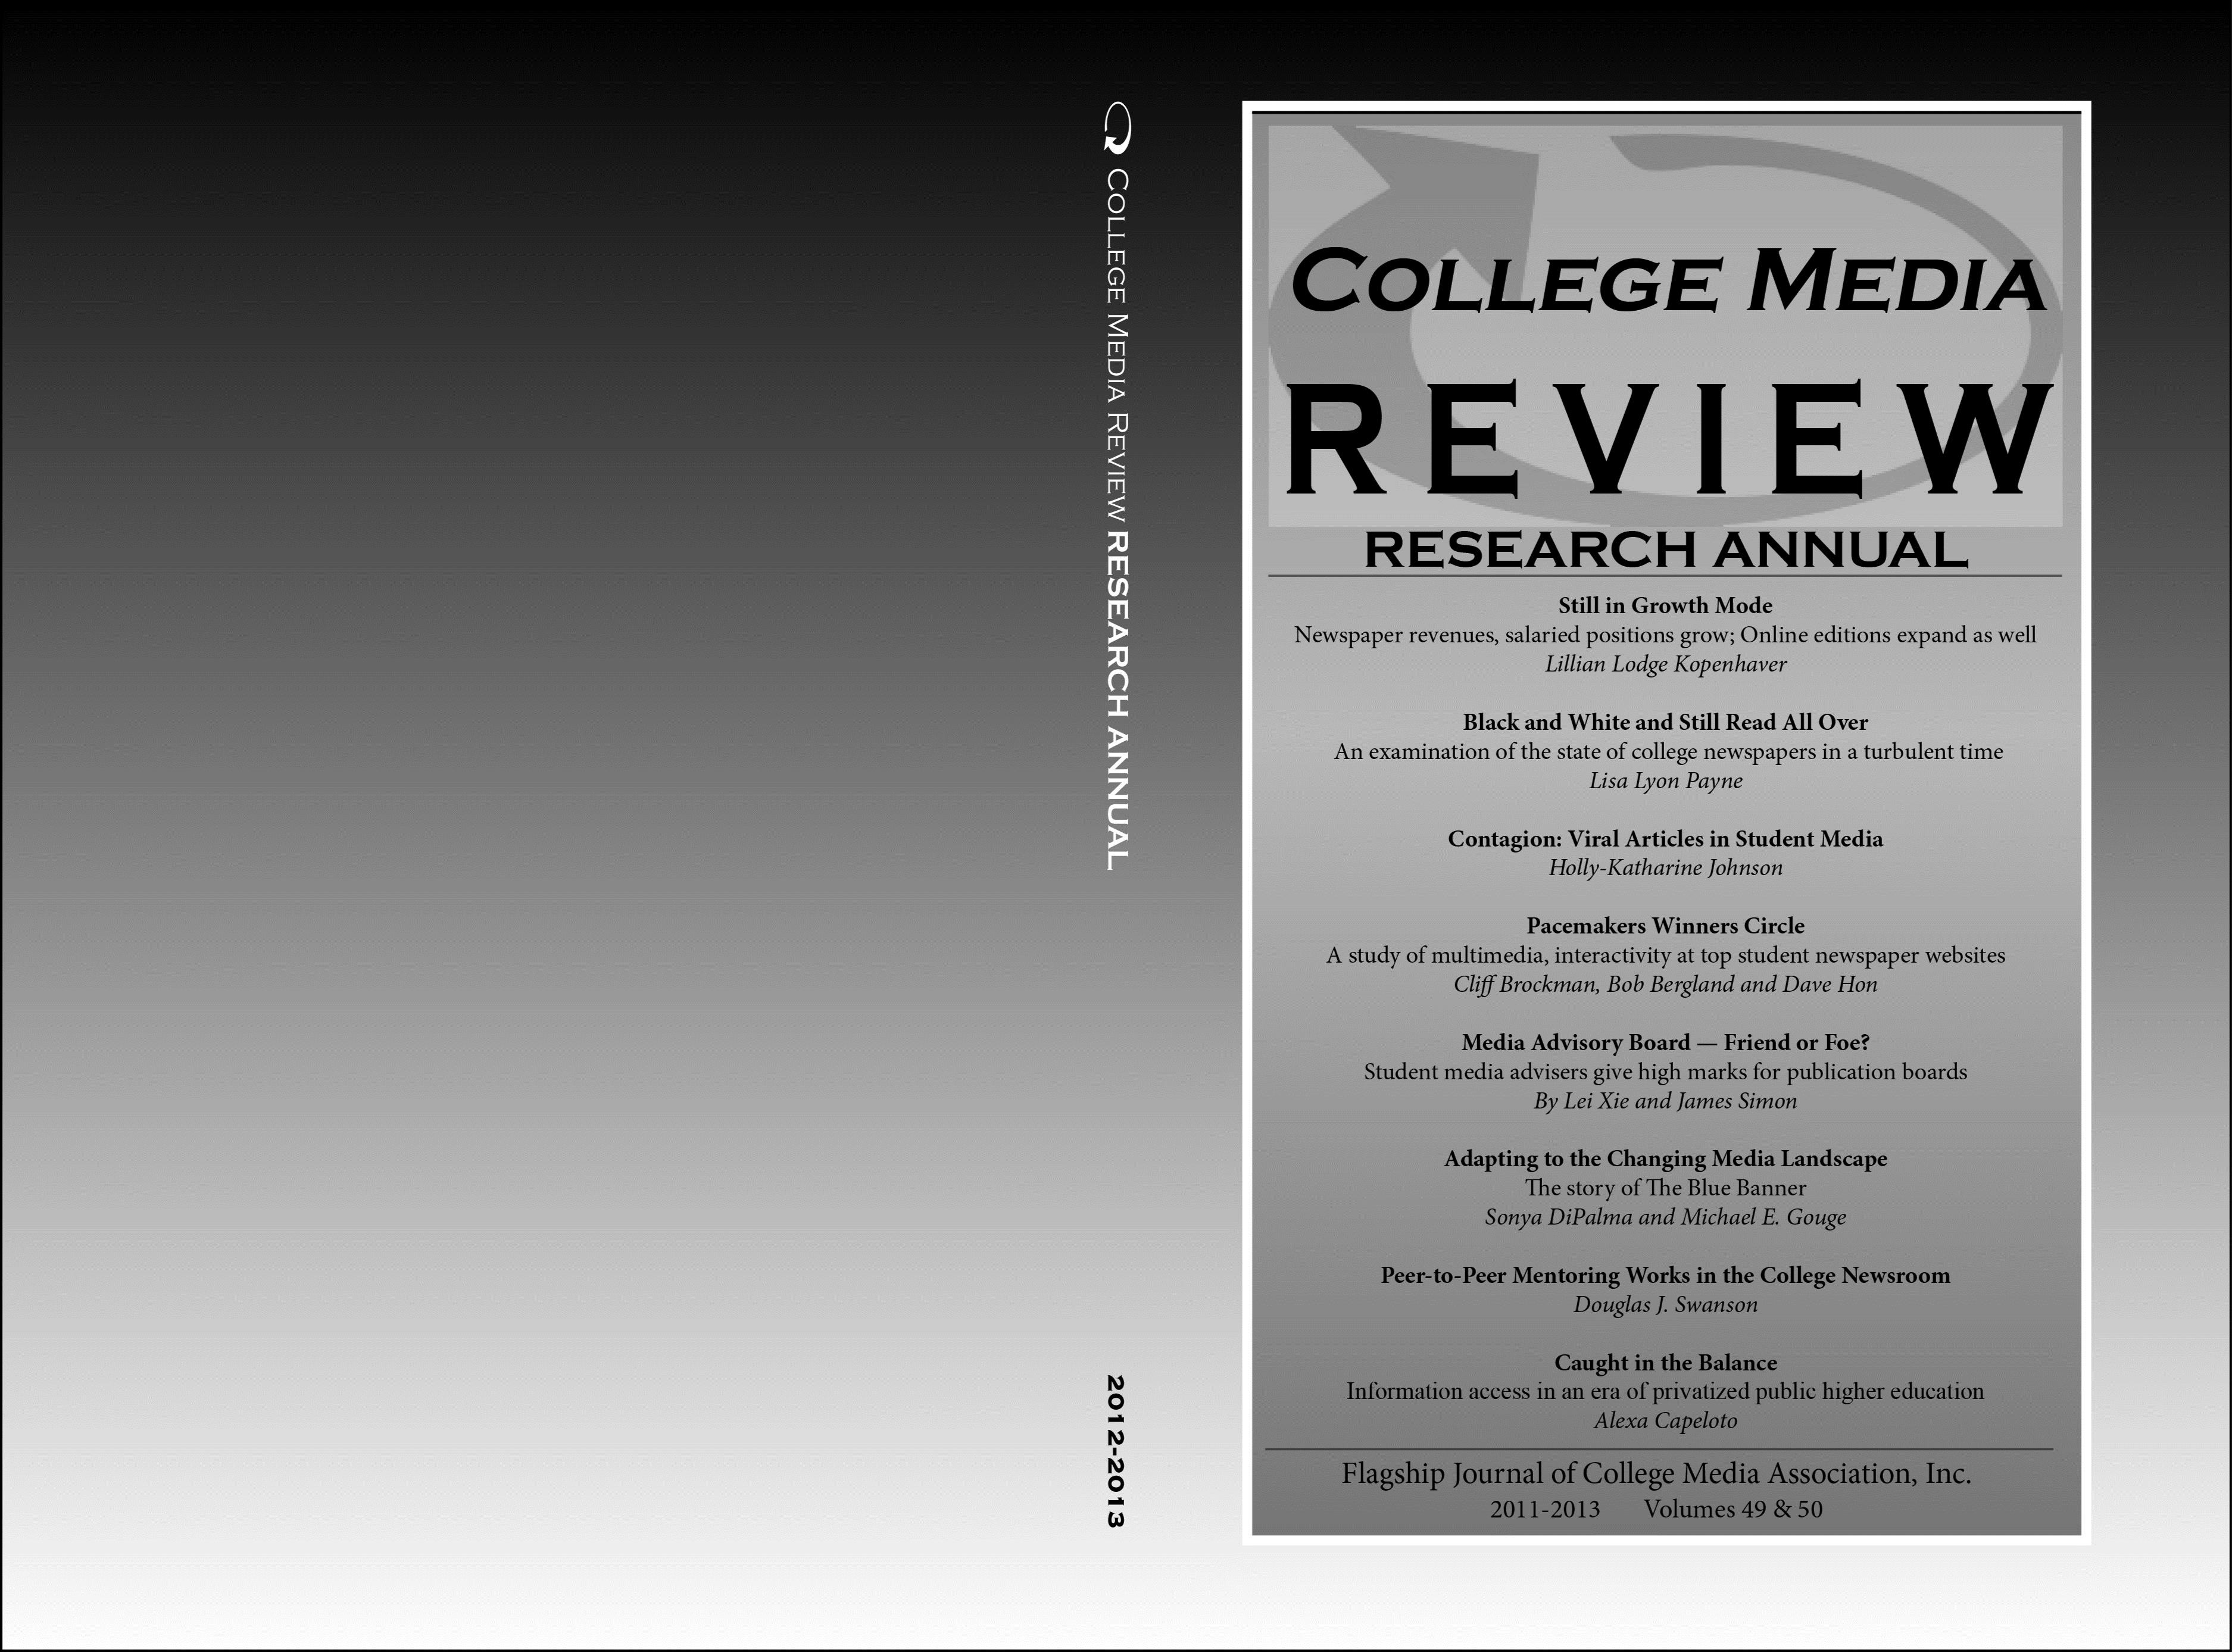 College Media Review Research Annual 2012 | 2013 cover image